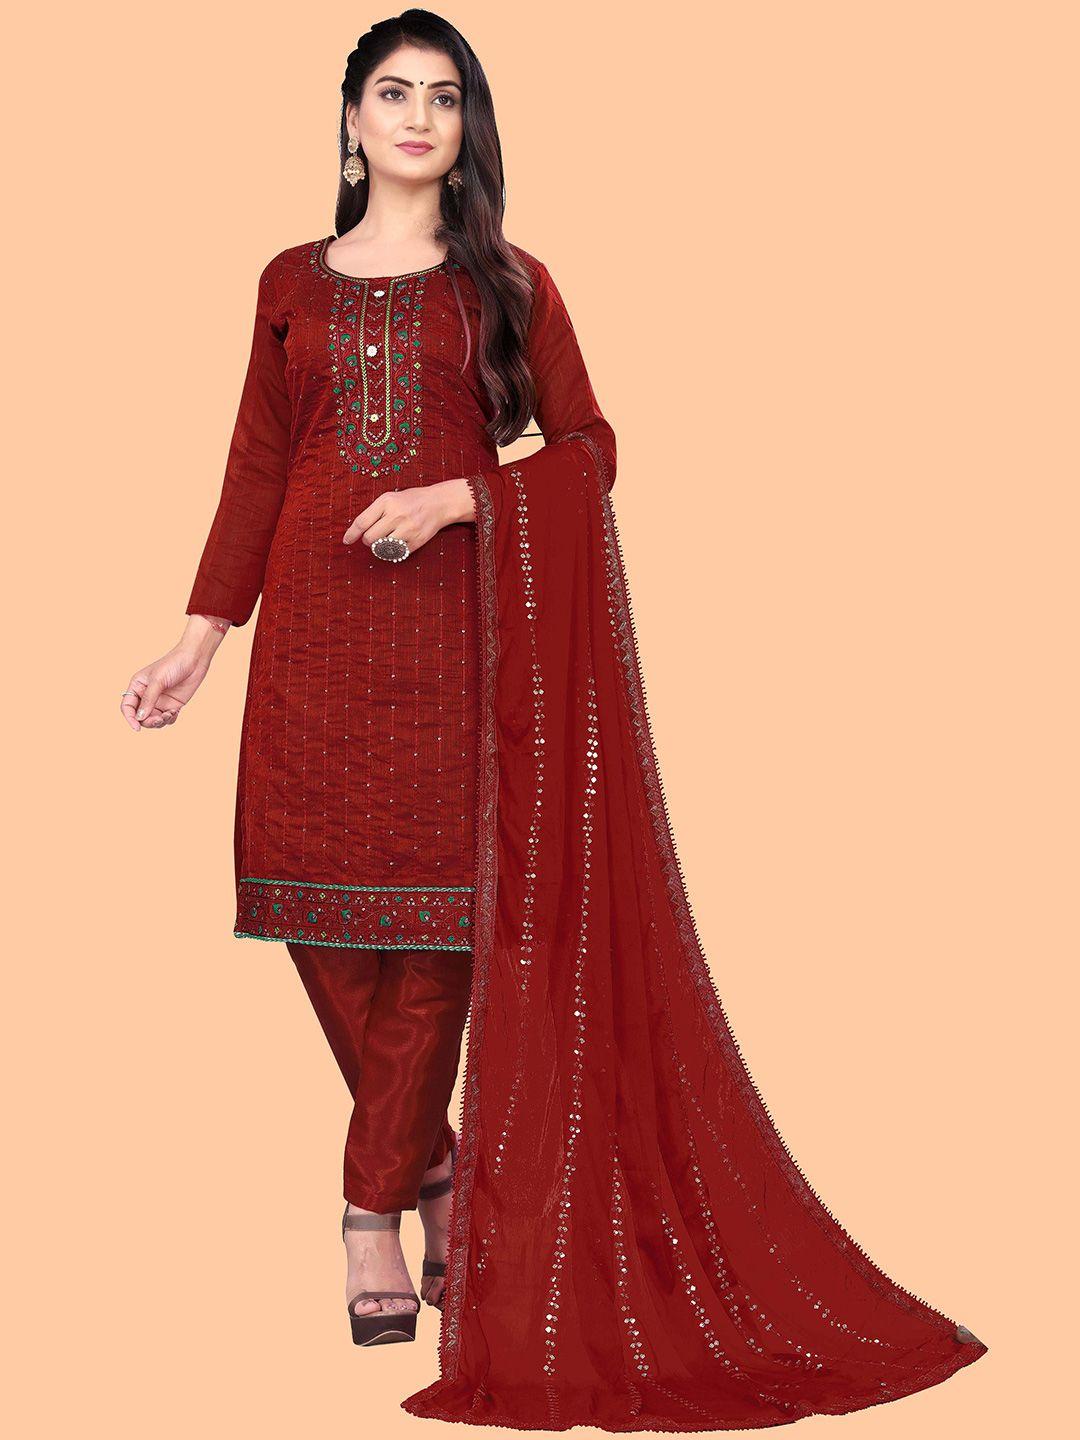 shadow-&-saining-women-maroon-&-green-embroidered-unstitched-dress-material